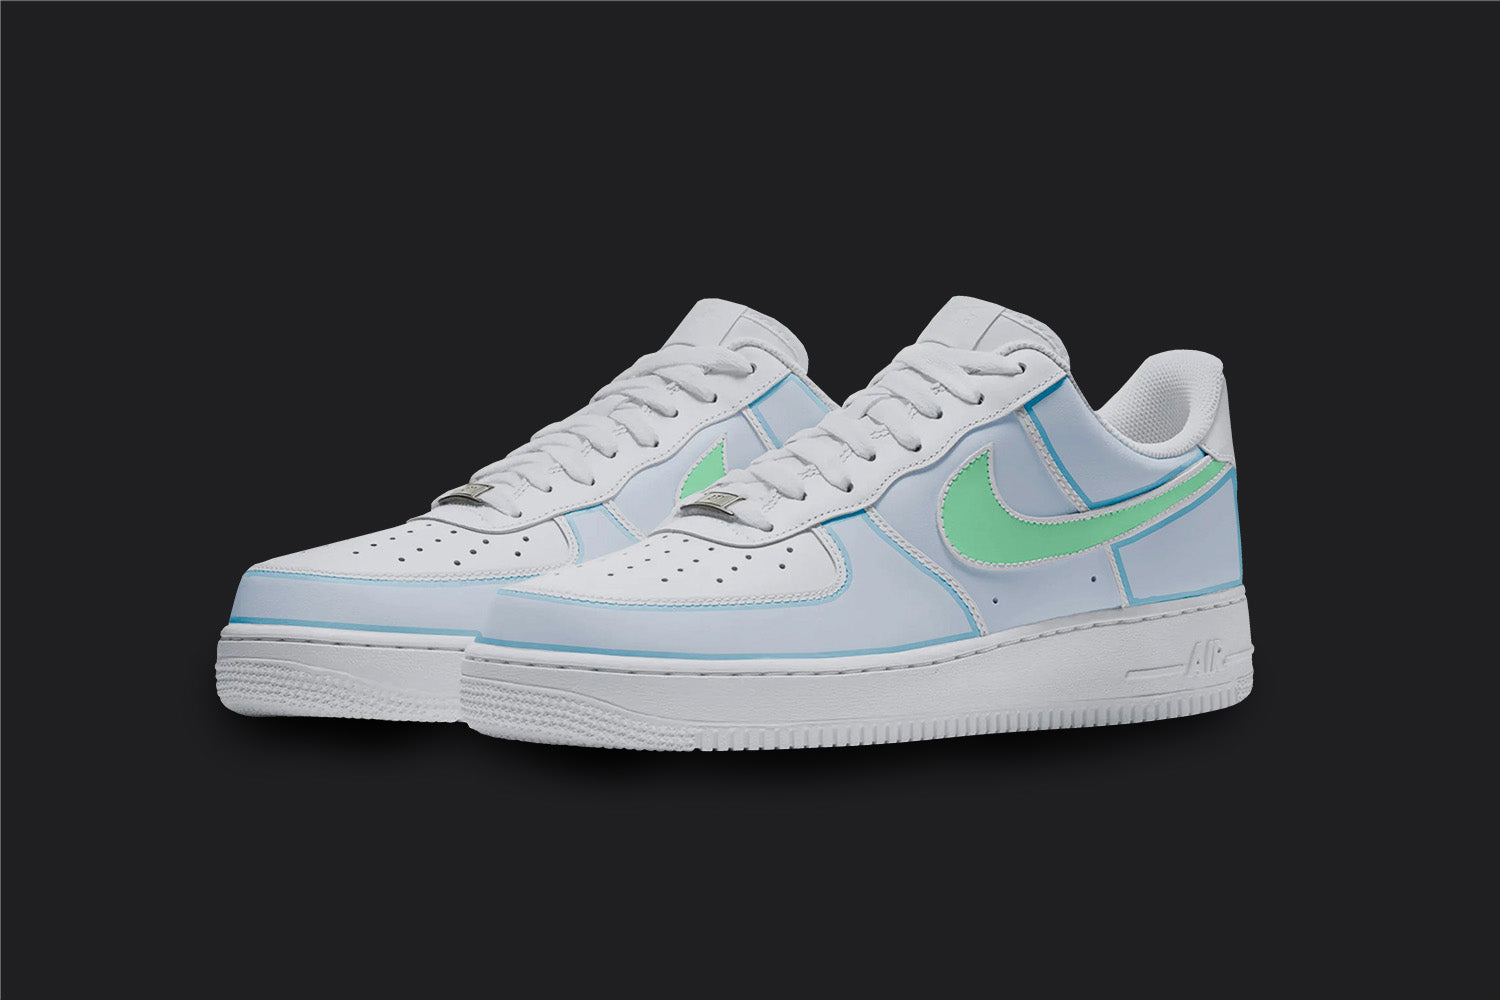 The image is of a Custom Nike Air force 1 sneaker pair on a blank black background. The pastel blue custom sneakers have a mint green design on the side of the shoes.